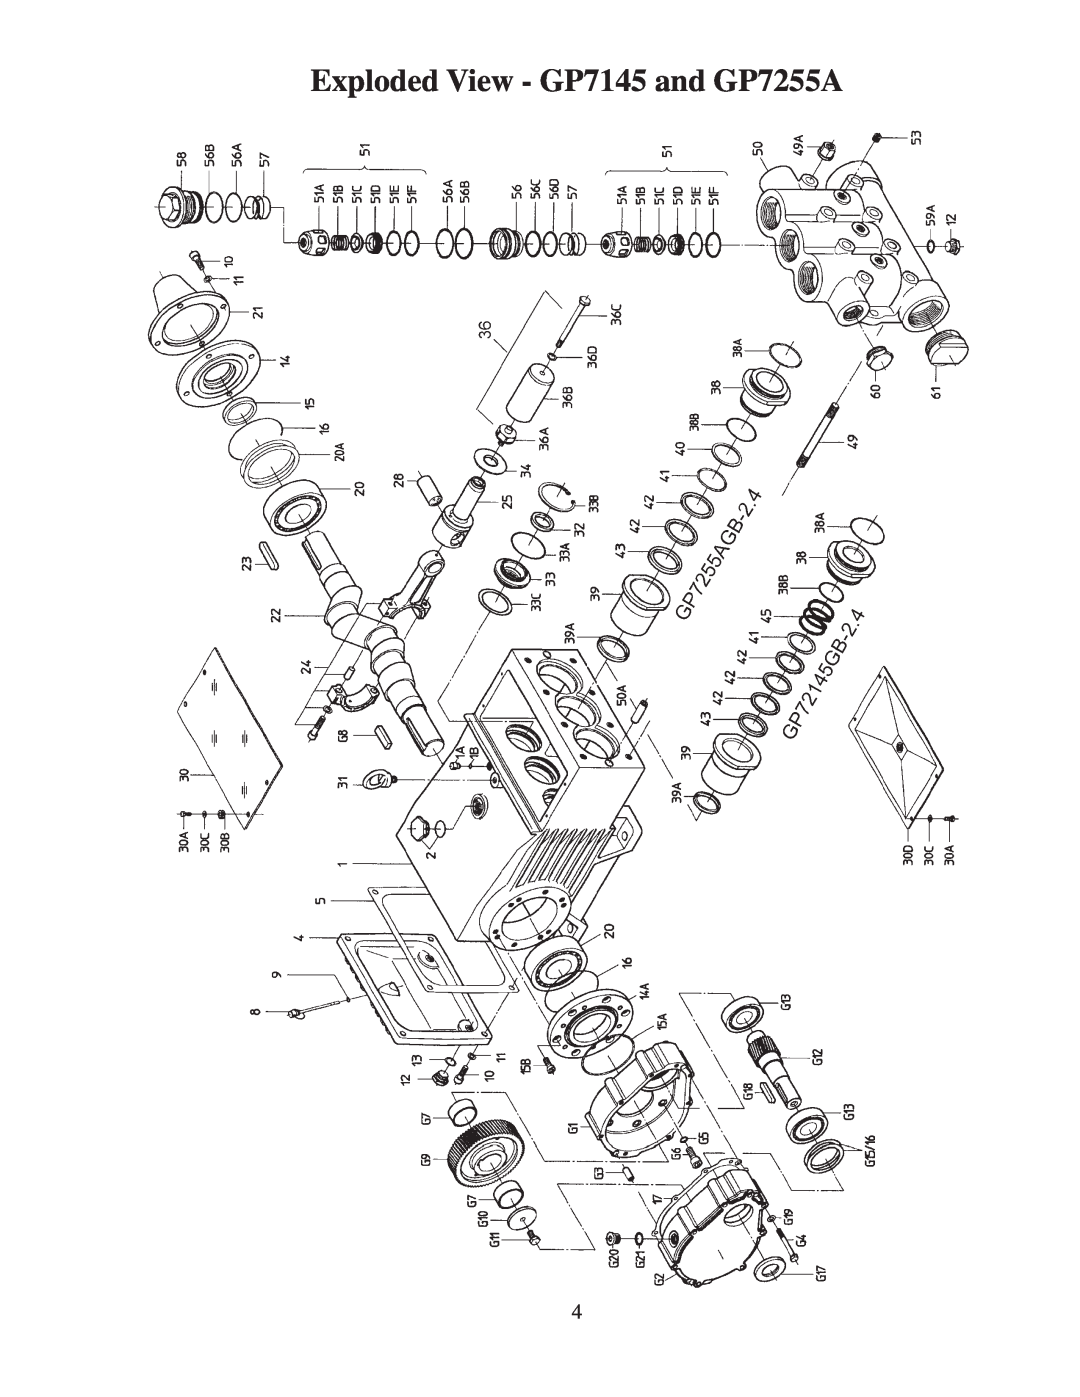 Giant installation instructions Exploded View - GP7145 and GP7255A 